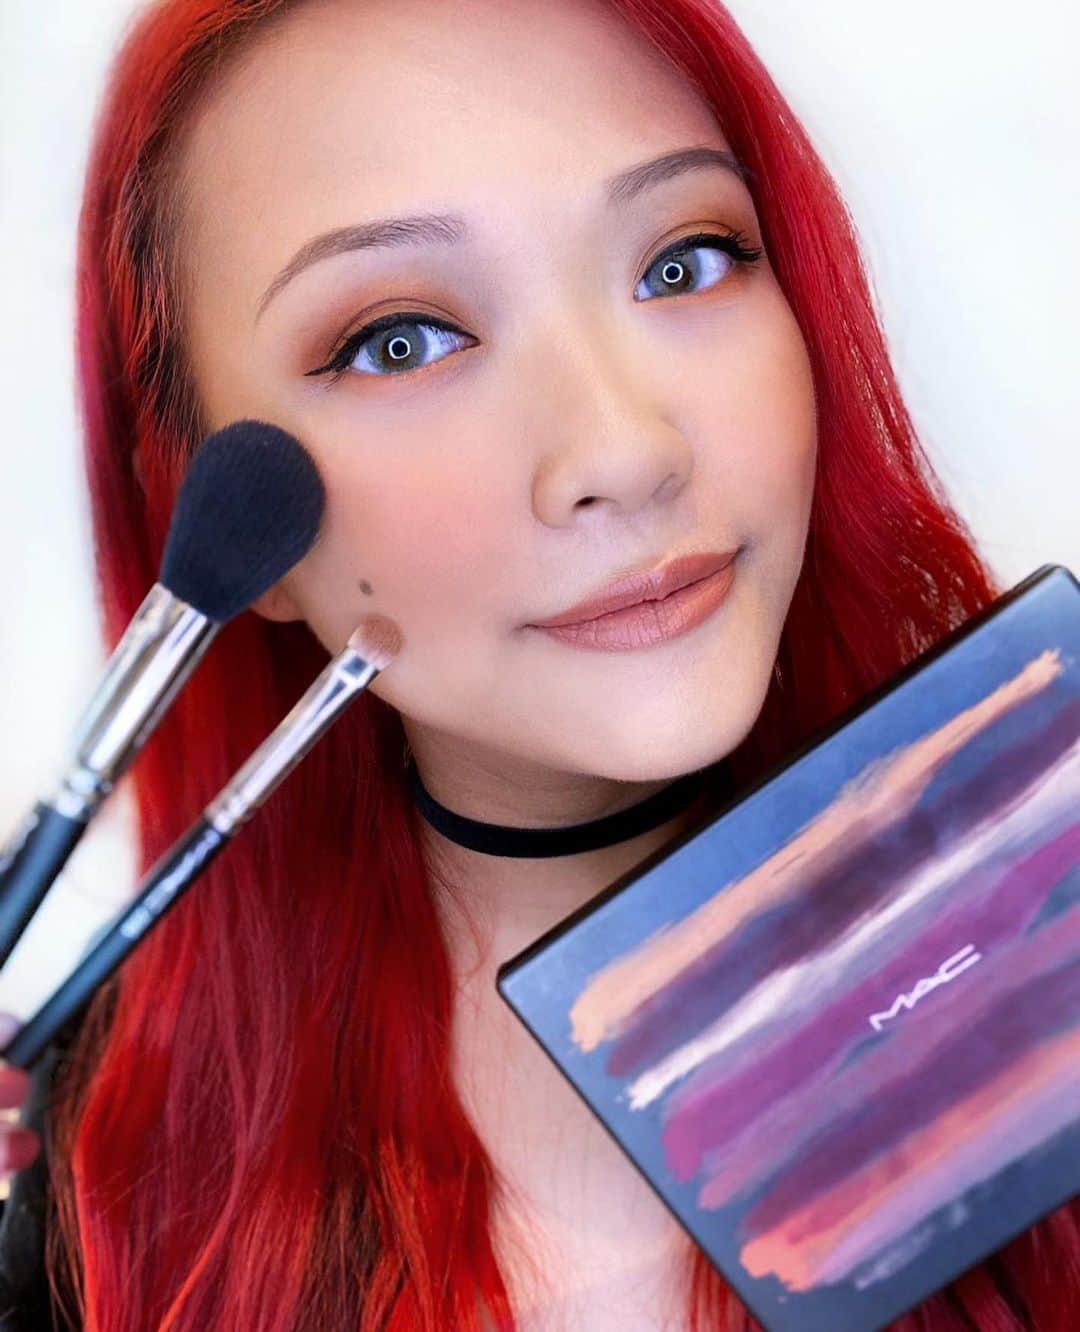 M·A·C Cosmetics Hong Kongさんのインスタグラム写真 - (M·A·C Cosmetics Hong KongInstagram)「[M·A·C ARTIST’S PICKS]  最近大熱嘅Art Library時尚專業12色眼影盤 原來唔止可以用作eye shadow! 專業化妝師 @zzzackmakeup 用佢一盒化好同色系#紅茶楓葉妝！ 🍁暈染眼影：利用乾燥磚紅#及和暖橙調，以239S 眼影掃暈染出自然漸層 🍁和暖腮紅：以129S多用蜜粉/胭脂掃將和暖橙調色號#Rule 掃上臉頰，完美襯托楓葉眼妝！ 係時候好好運用你手上嘅多色Palettes! M·A·C Artists 仲有好多技巧同你分享，快啲嚟搵門市搵佢地問下啦！ Product mentioned: 129S Powder/Blush 多用蜜粉/胭脂掃 - HK$340 239S Eye Shader 經典眼影掃 - HK$245 Art Library Eyeshadow Palette 時尚專業12色眼影盤 in Flame Boyant - HK$520 #MACHONGKONG #MAC妝FUN享 Regram: @zzzackmakeup @machelsingborg If you think eyeshadow palette is only for the eyes? Think again! Our Makeup Artist @zzzackmakeup loves using Art Library in Flame Boyant for multi-purposes and here’s how! 🍁 Mix & Match - create a trending maple eye look with our brick red and orange eyeshadow shades and pair it with brush 239 for the perfect blending effect 🍁 Blush in a rush - Use #Rule in the palette with brush 129 for a beautiful warm orangy blush that match perfectly with the eyes!  Any more ideas on the use of this palette? Come to find our Makeup Artist and you’ll know!」11月28日 19時31分 - maccosmeticshk